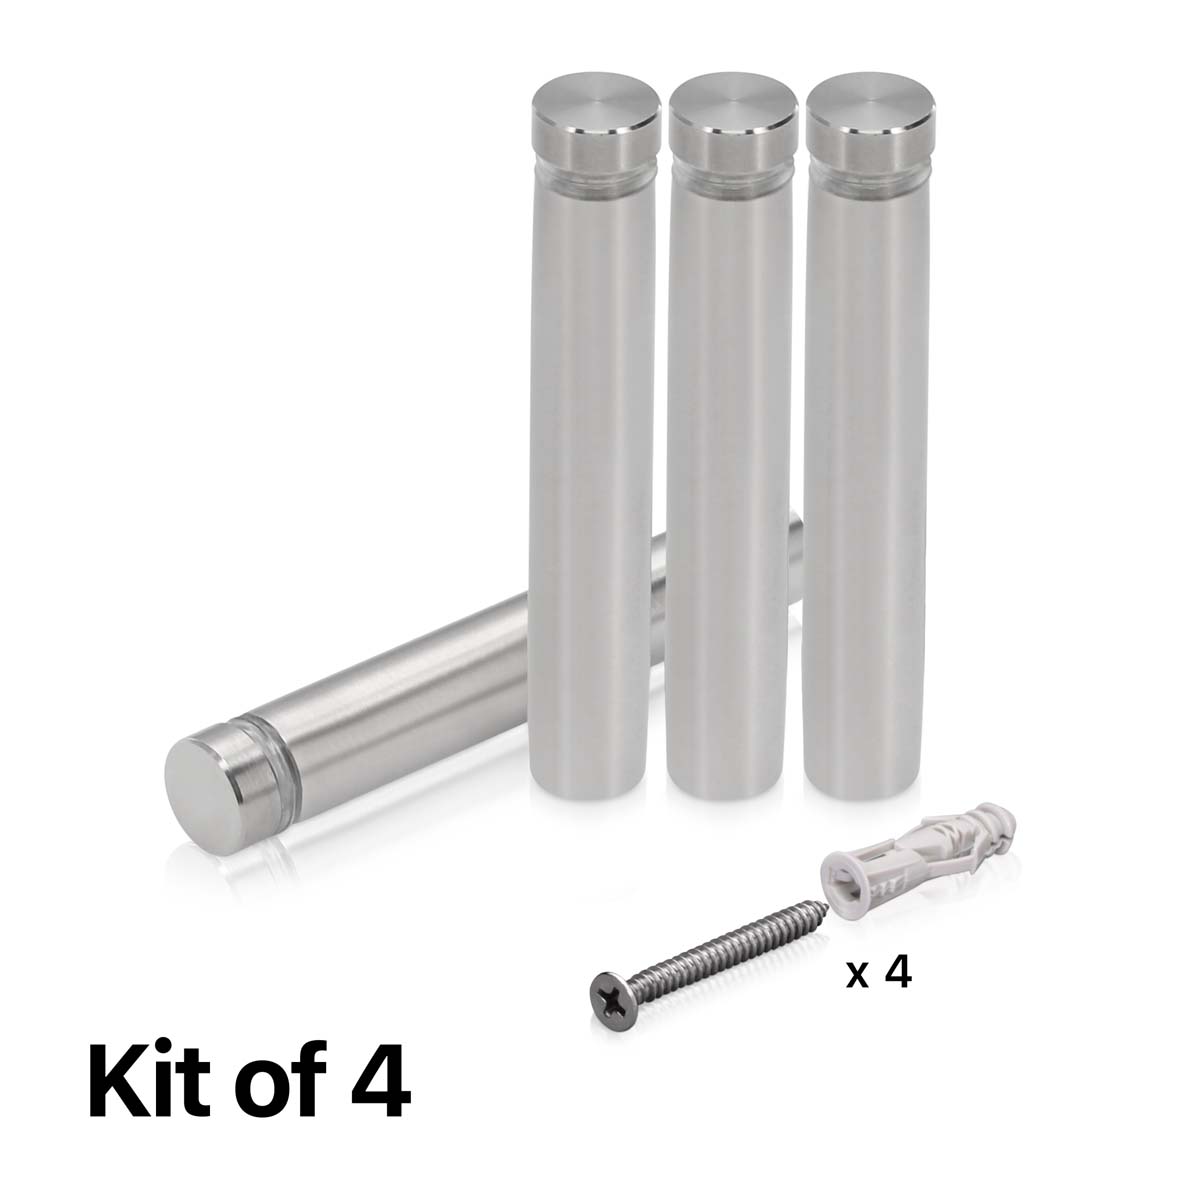 (Set of 4) 1/2'' Diameter X 2-1/2'' Barrel Length, Hollow Stainless Steel Brushed Finish. Easy Fasten Standoff with (4) 2208Z Screws and (4) LANC1 Anchors for concrete or drywall (For Inside Use Only) [Required Material Hole Size: 3/8'']